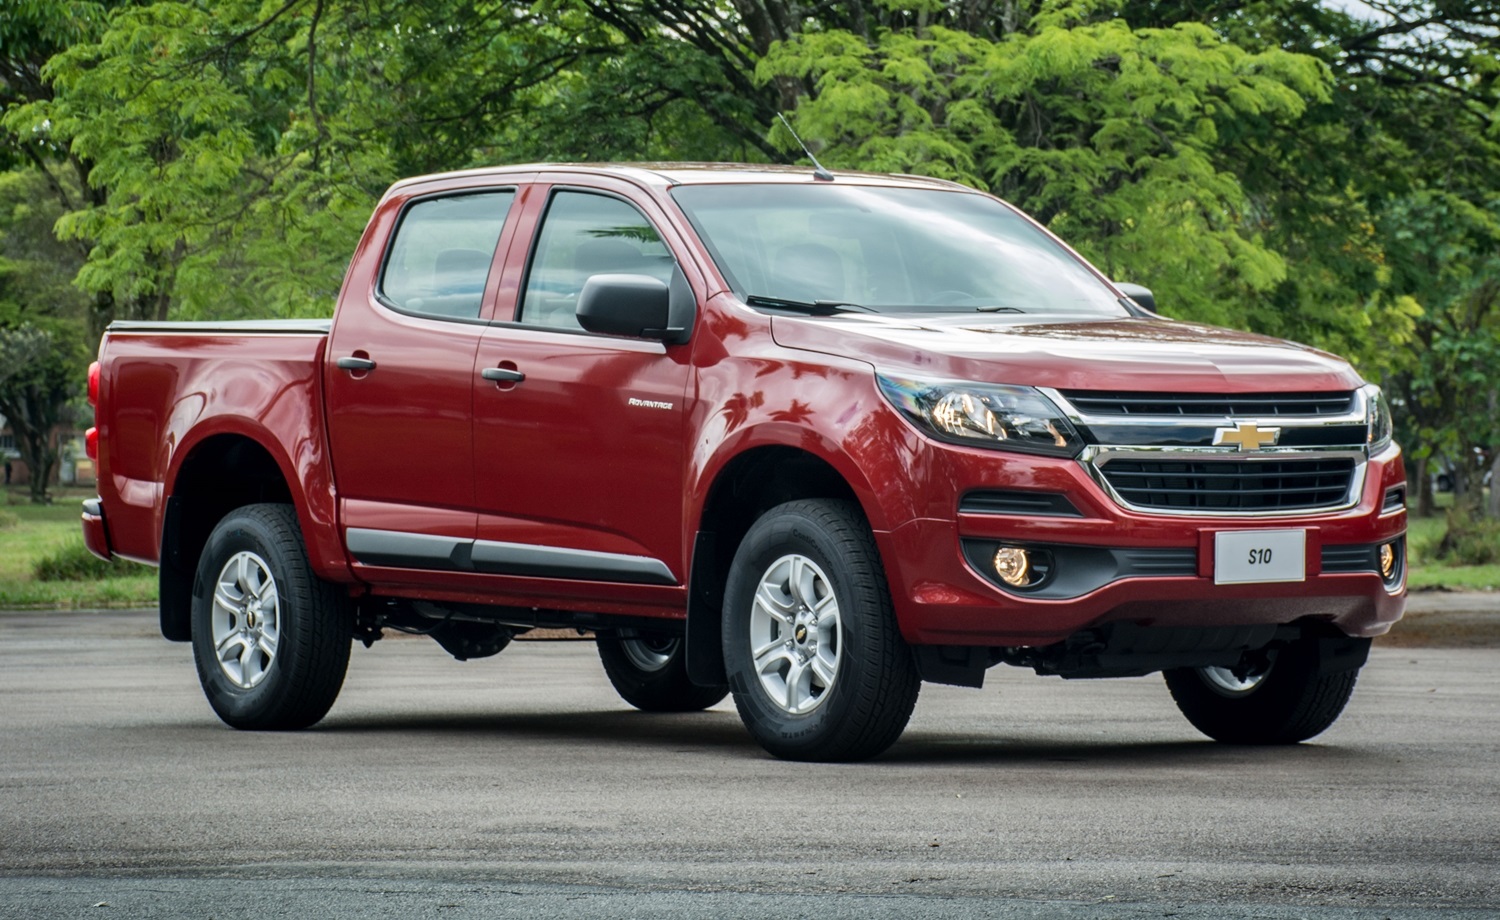 GM Introduces New Chevrolet S10 LT Pickup In Argentina | GM Authority